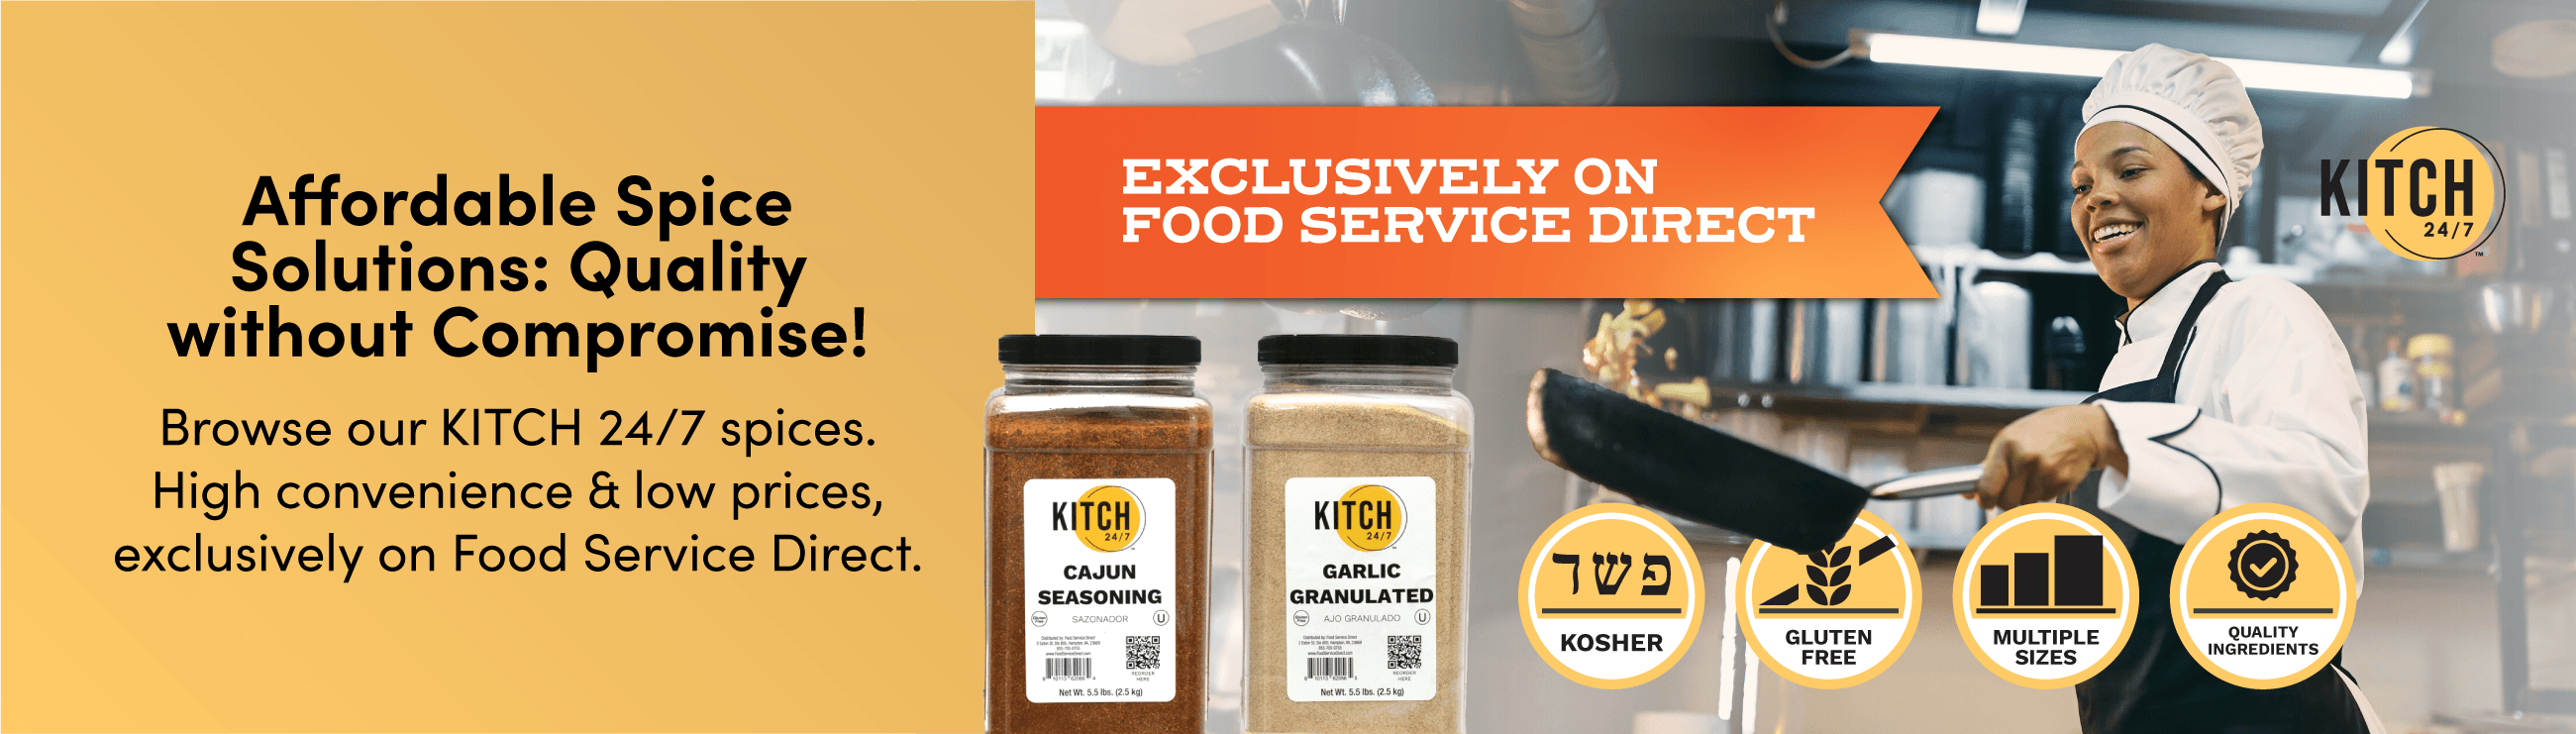 Kitch 24/7 spices